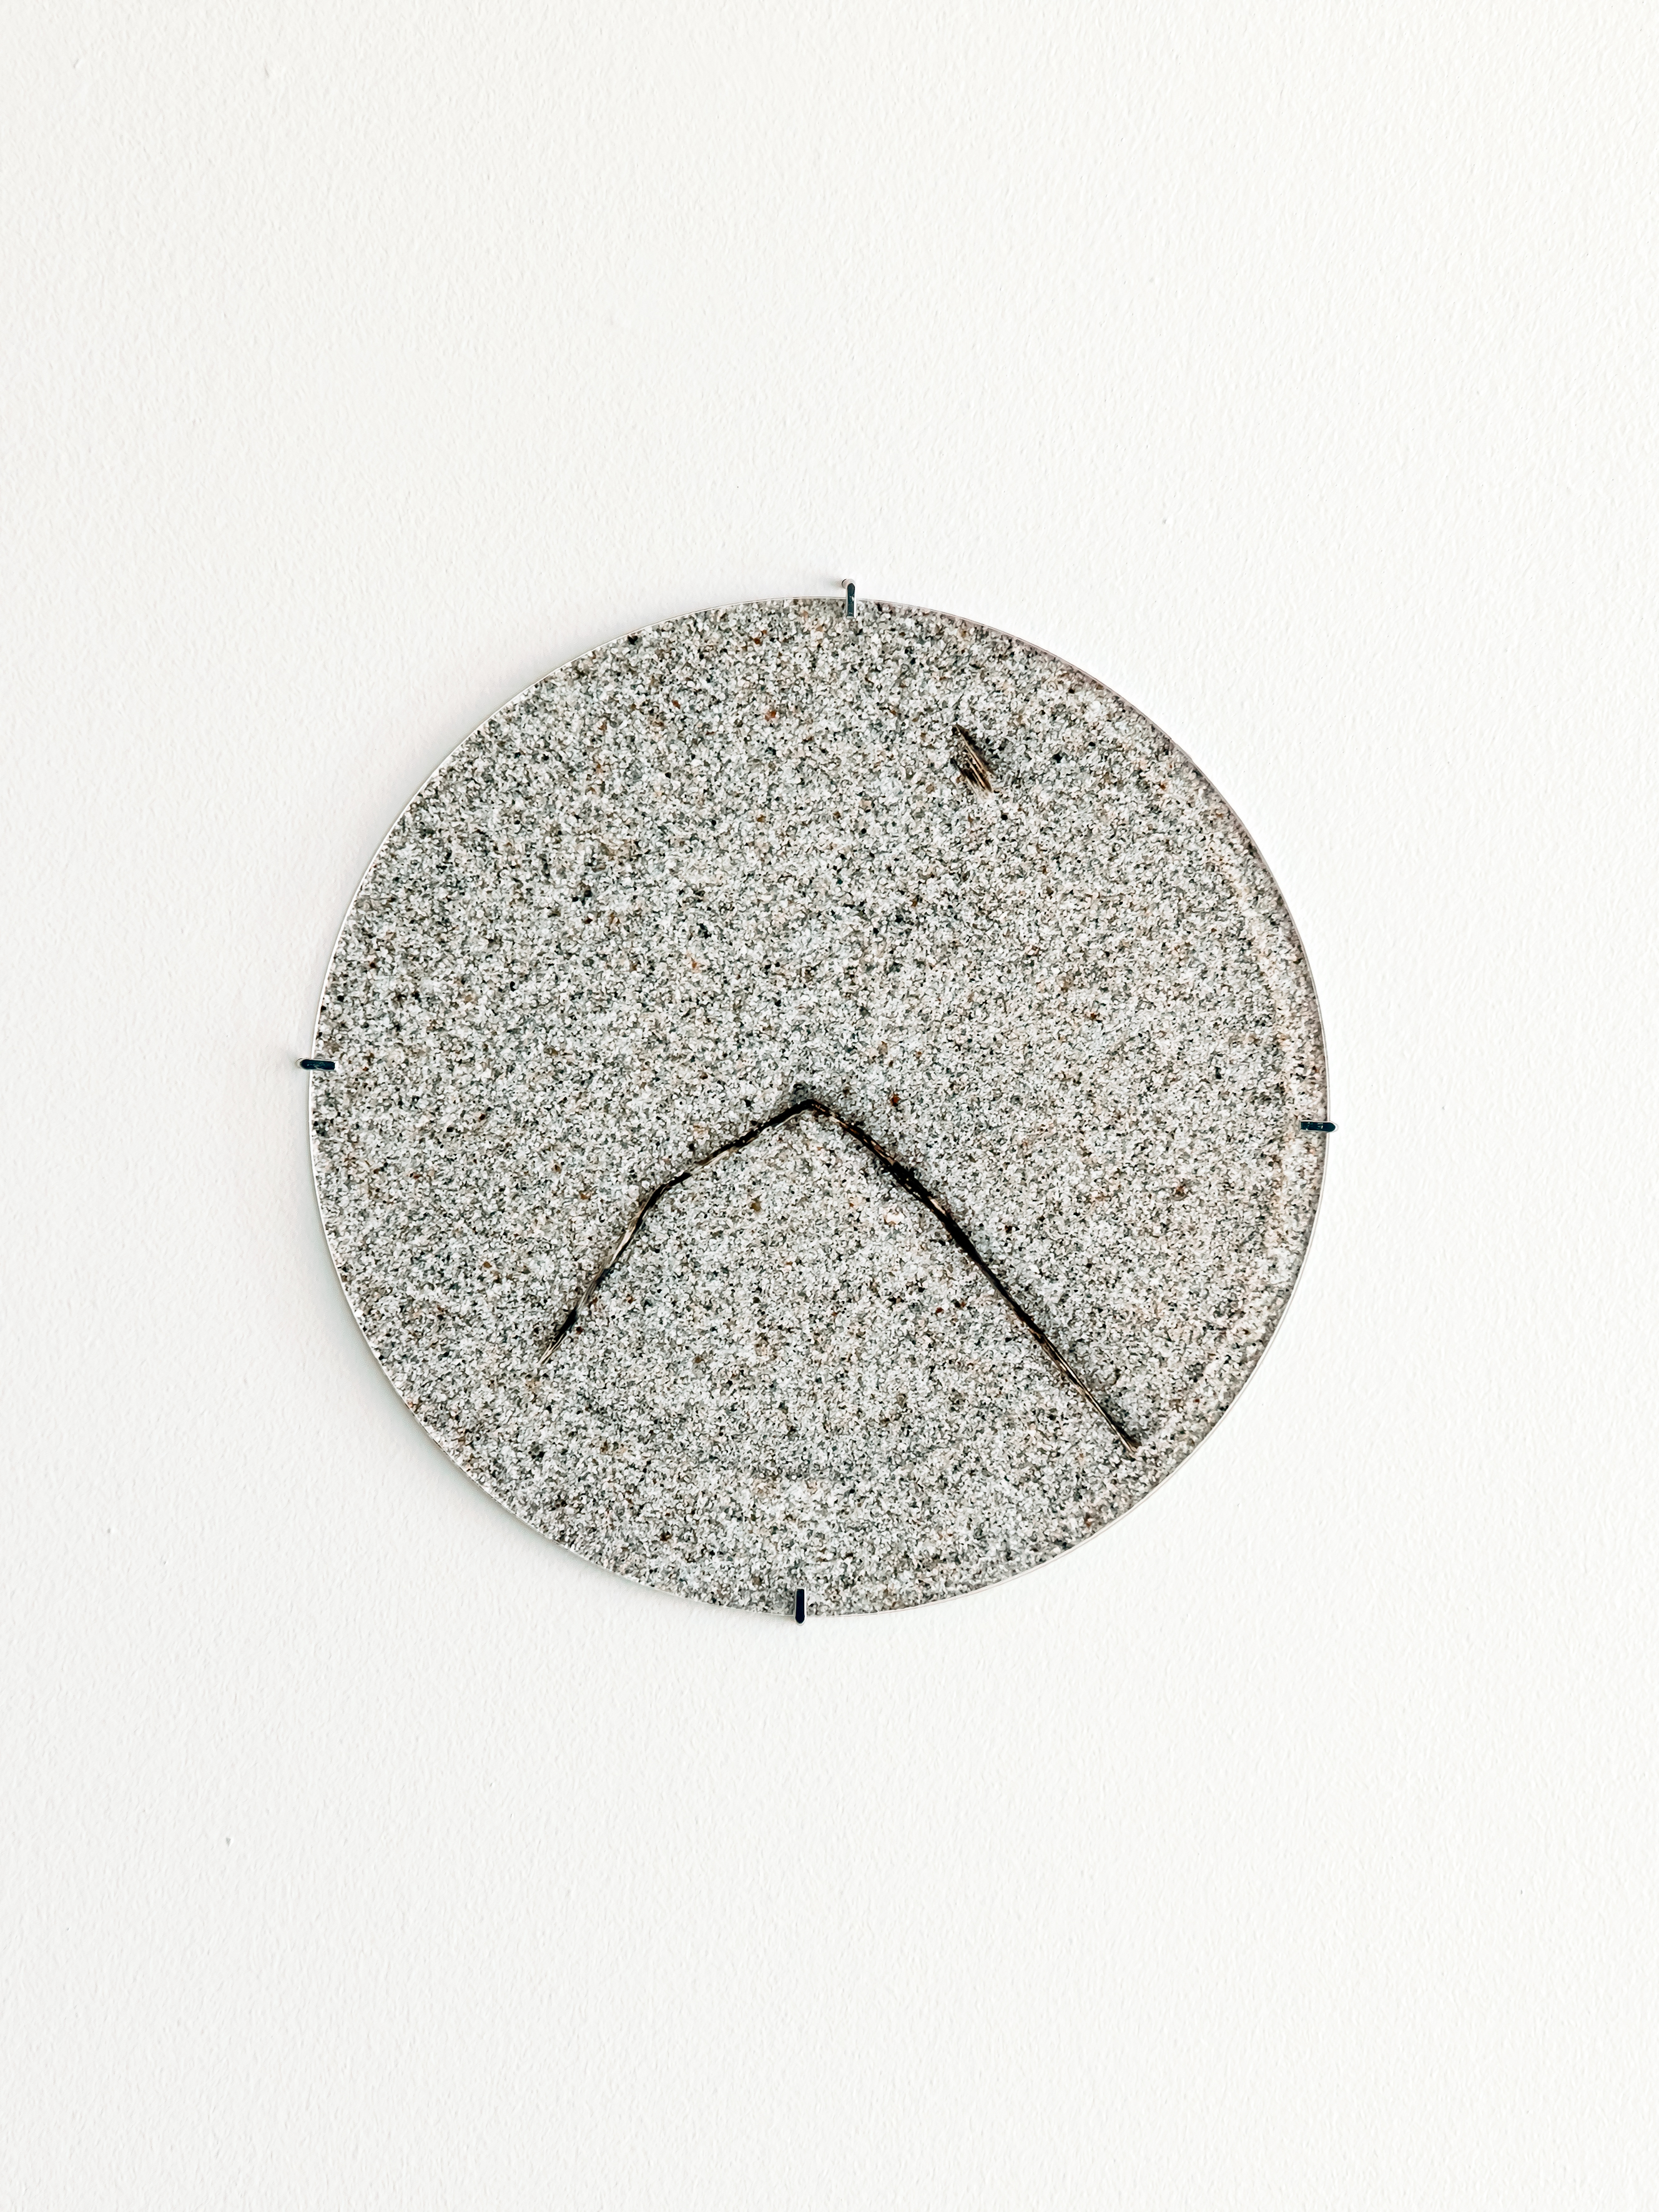 Kristina Bengtsson, Time is smiling at you, 2019